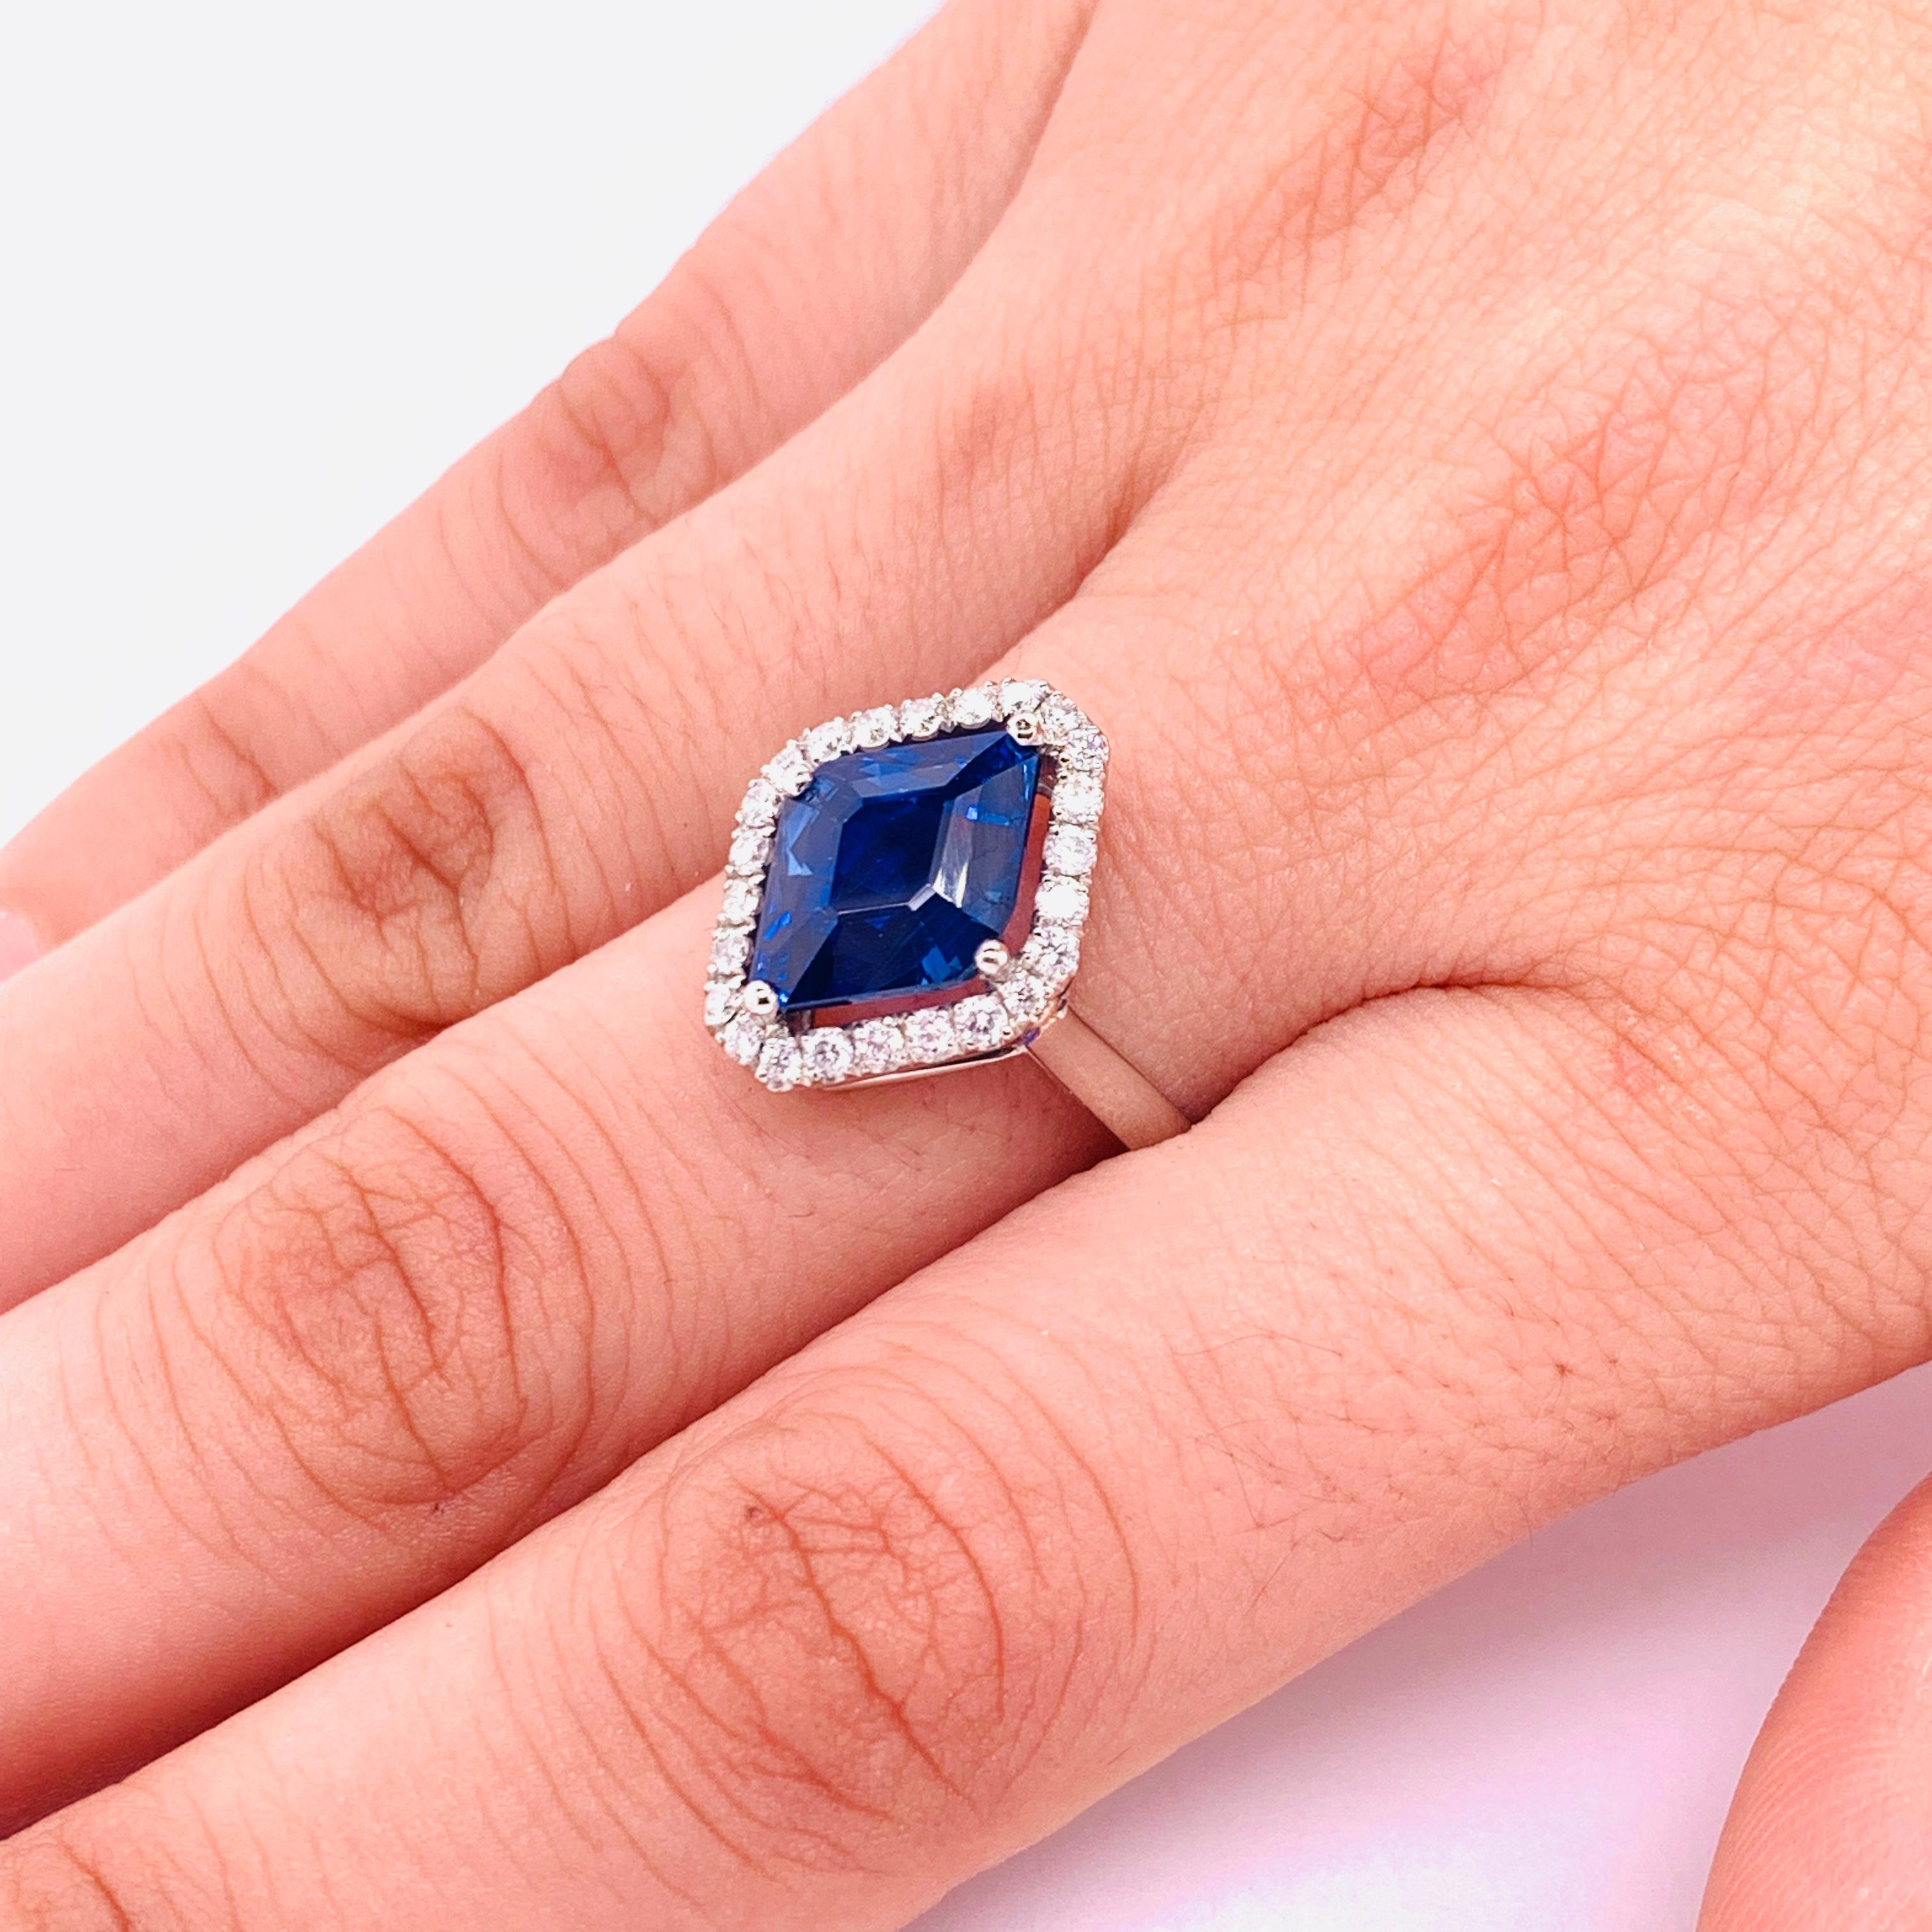 A sapphire and diamond ring, set with a cornered-cut, lozenge shape Ceylon sapphire, weighing approximately 4.81ct, in a four claw setting, with a border of 30, round brilliant-cut diamonds, with a total weight of 0.40ct, mounted in platinum,